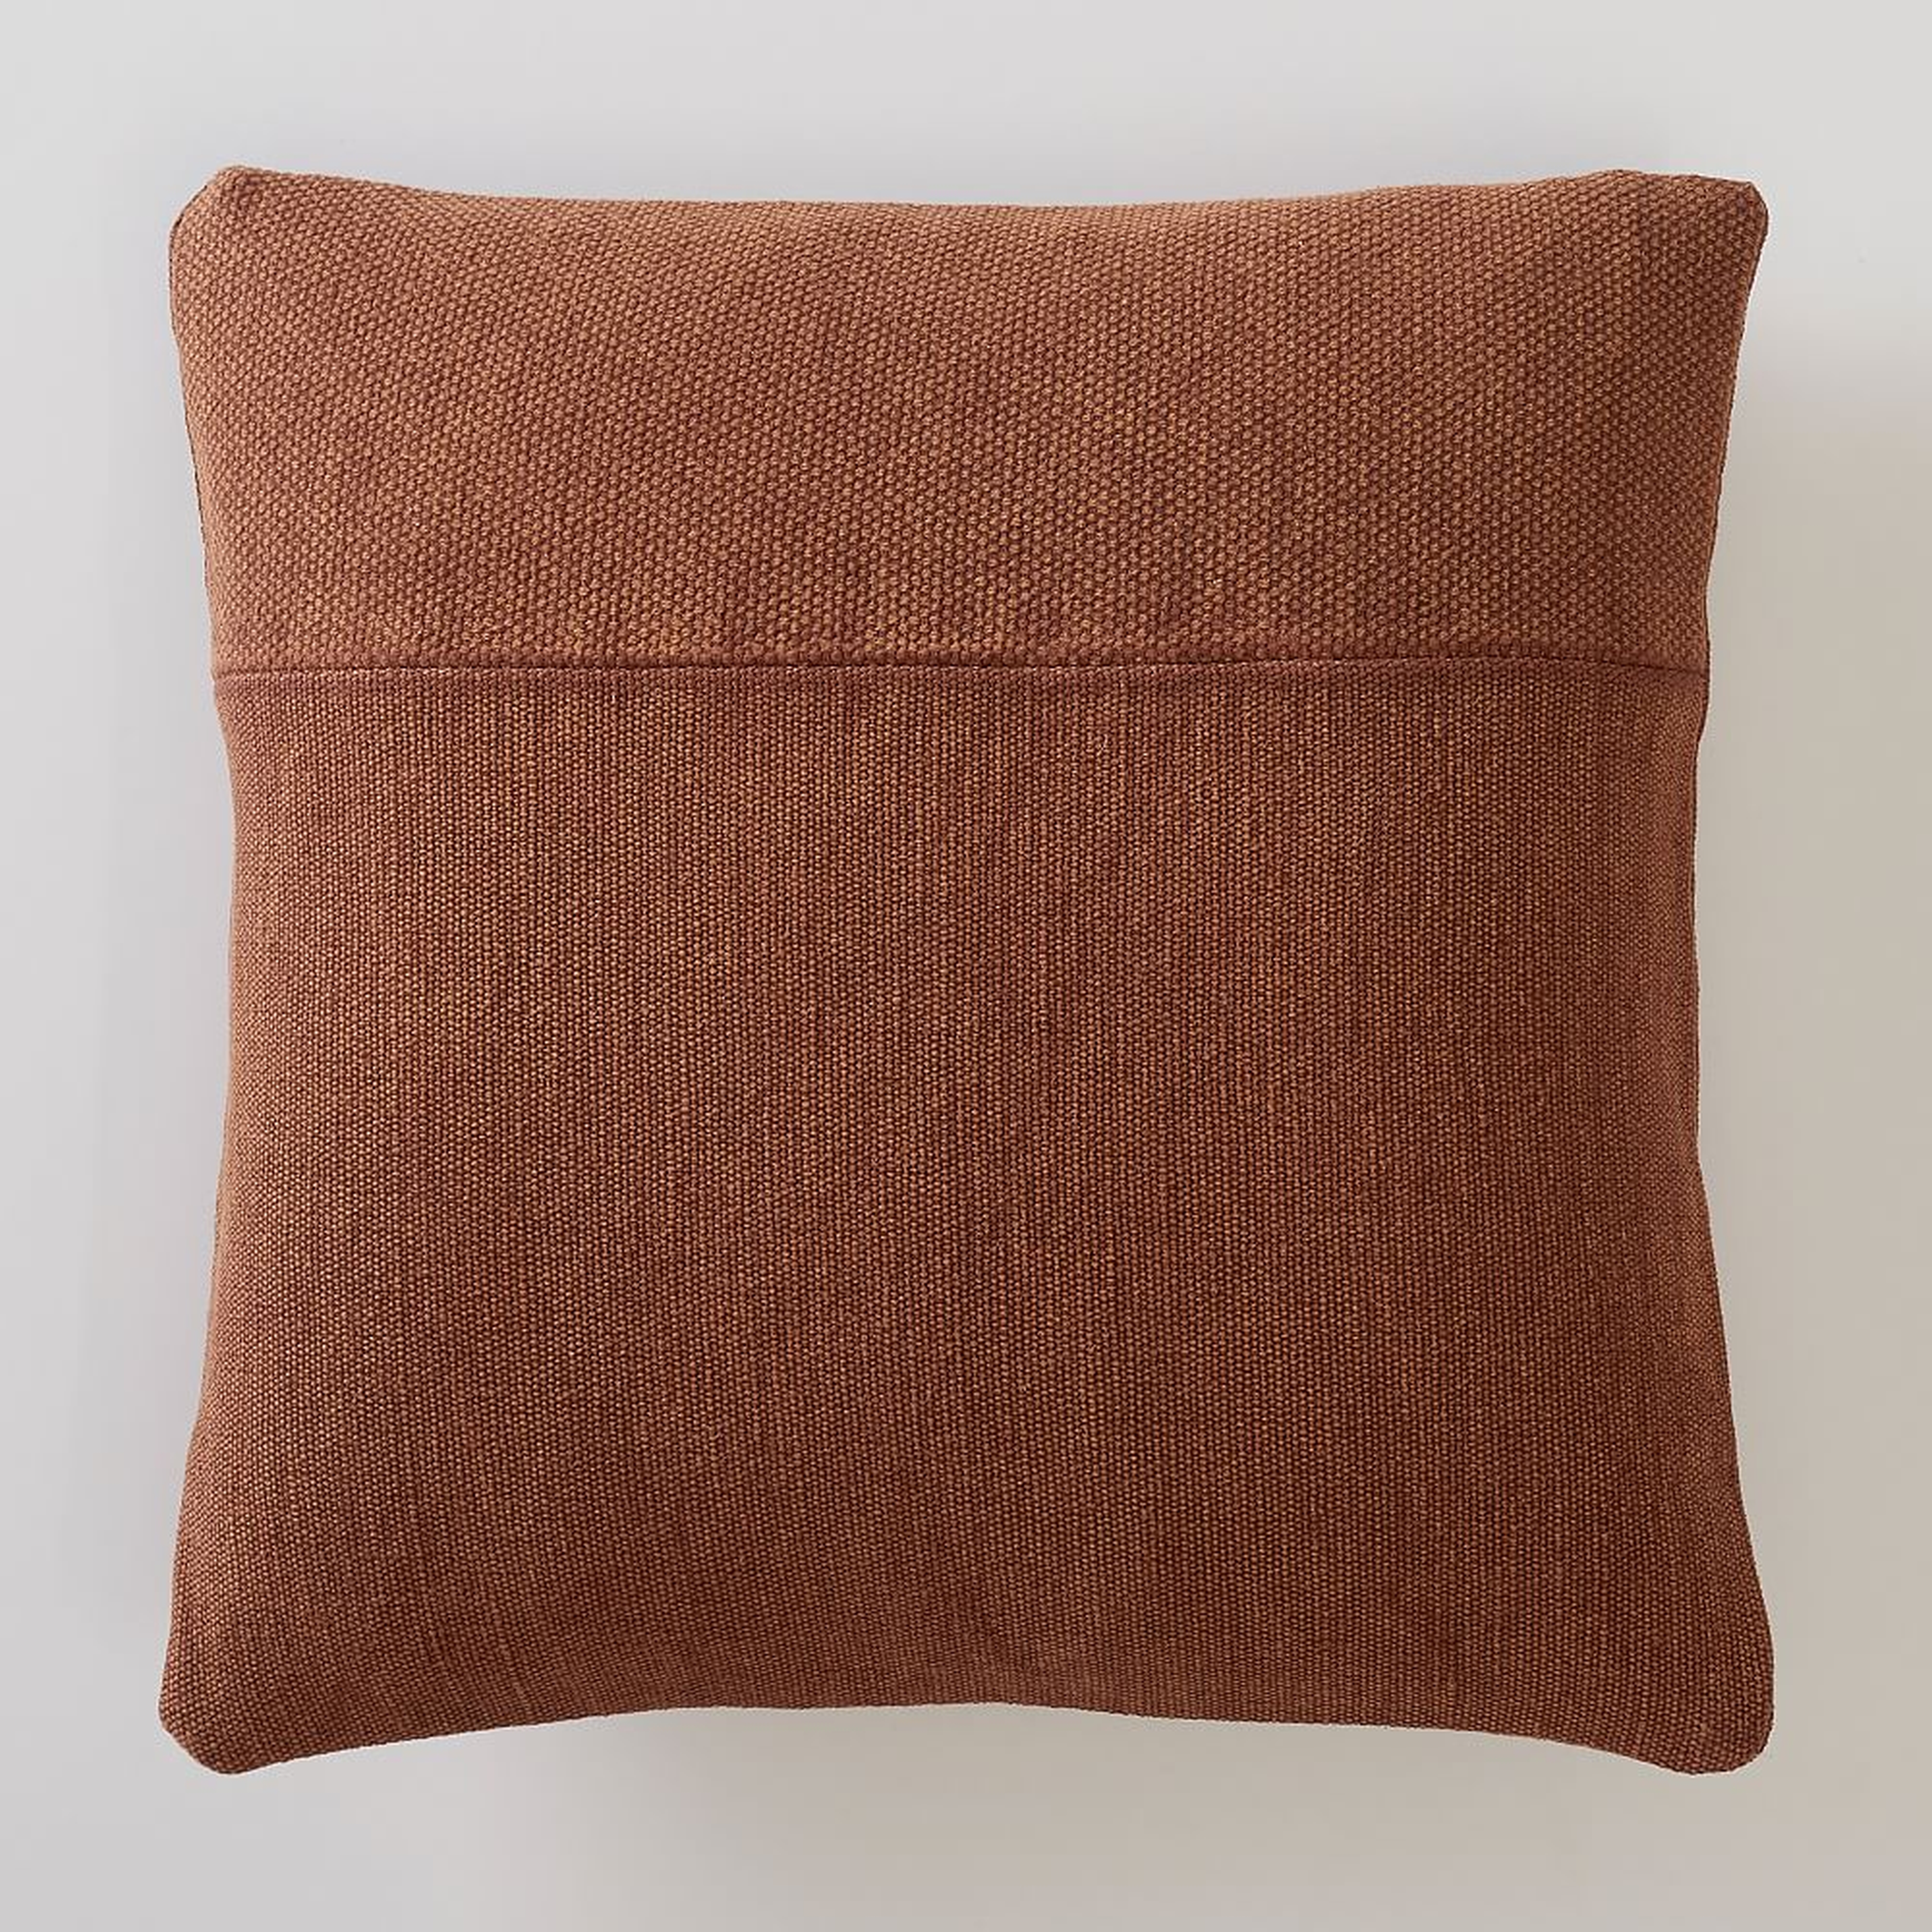 we x pbteen Cotton Canvas Pillow Cover, 18x18, Copper Rust - Pottery Barn Teen